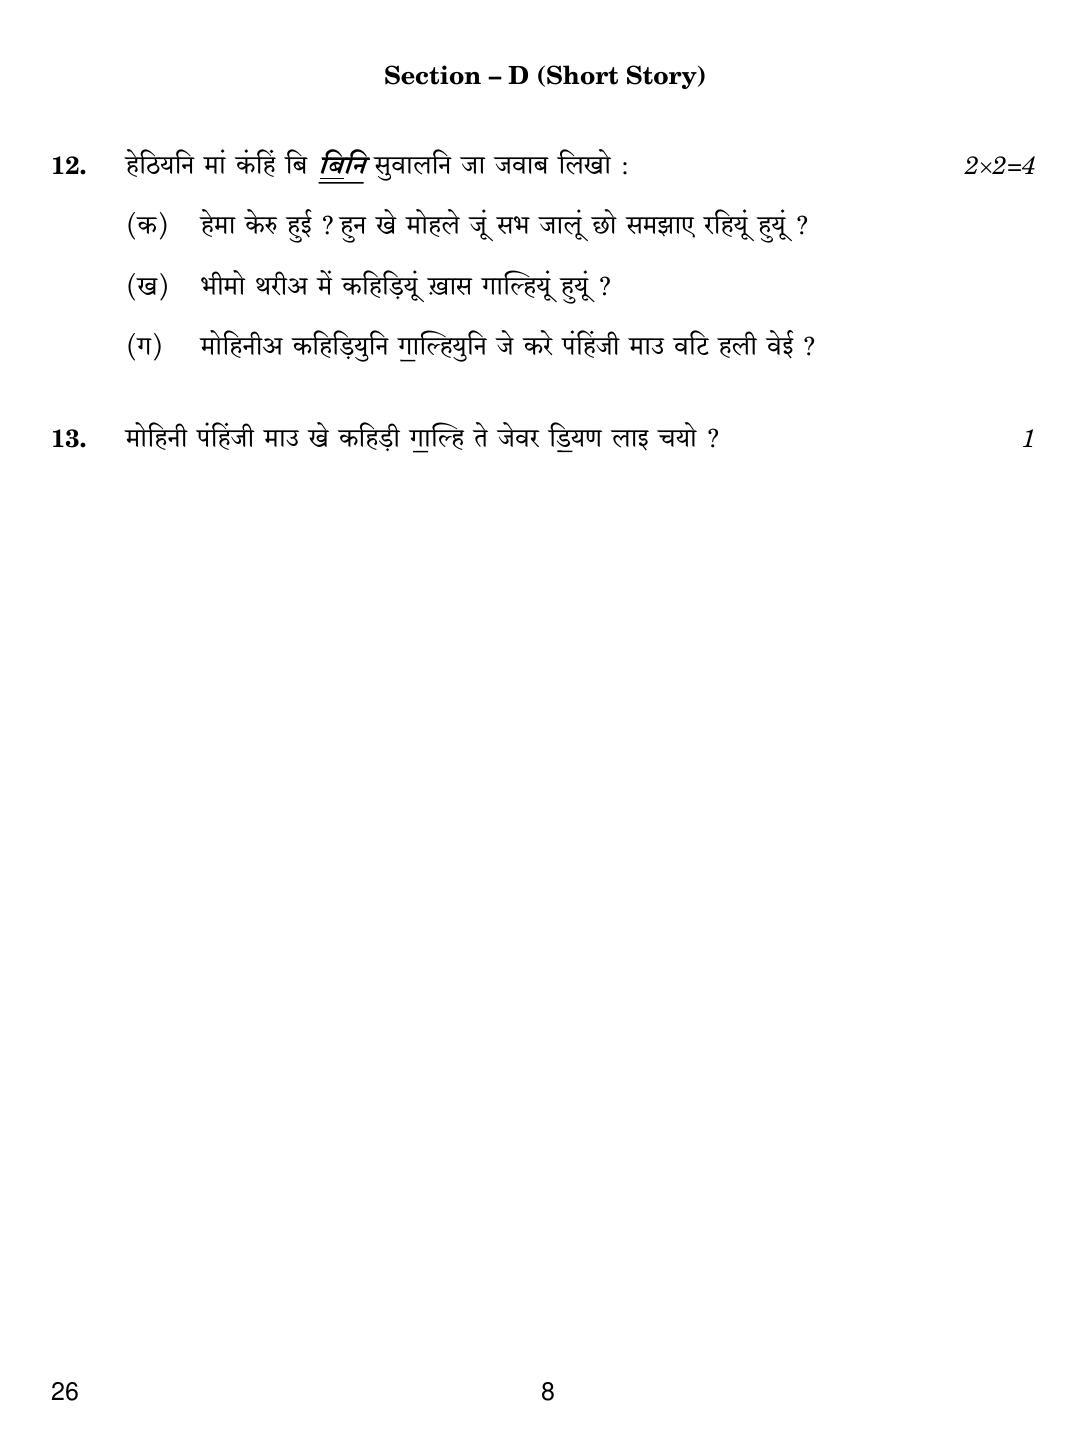 CBSE Class 10 26 SINDHI 2019 Question Paper - Page 8